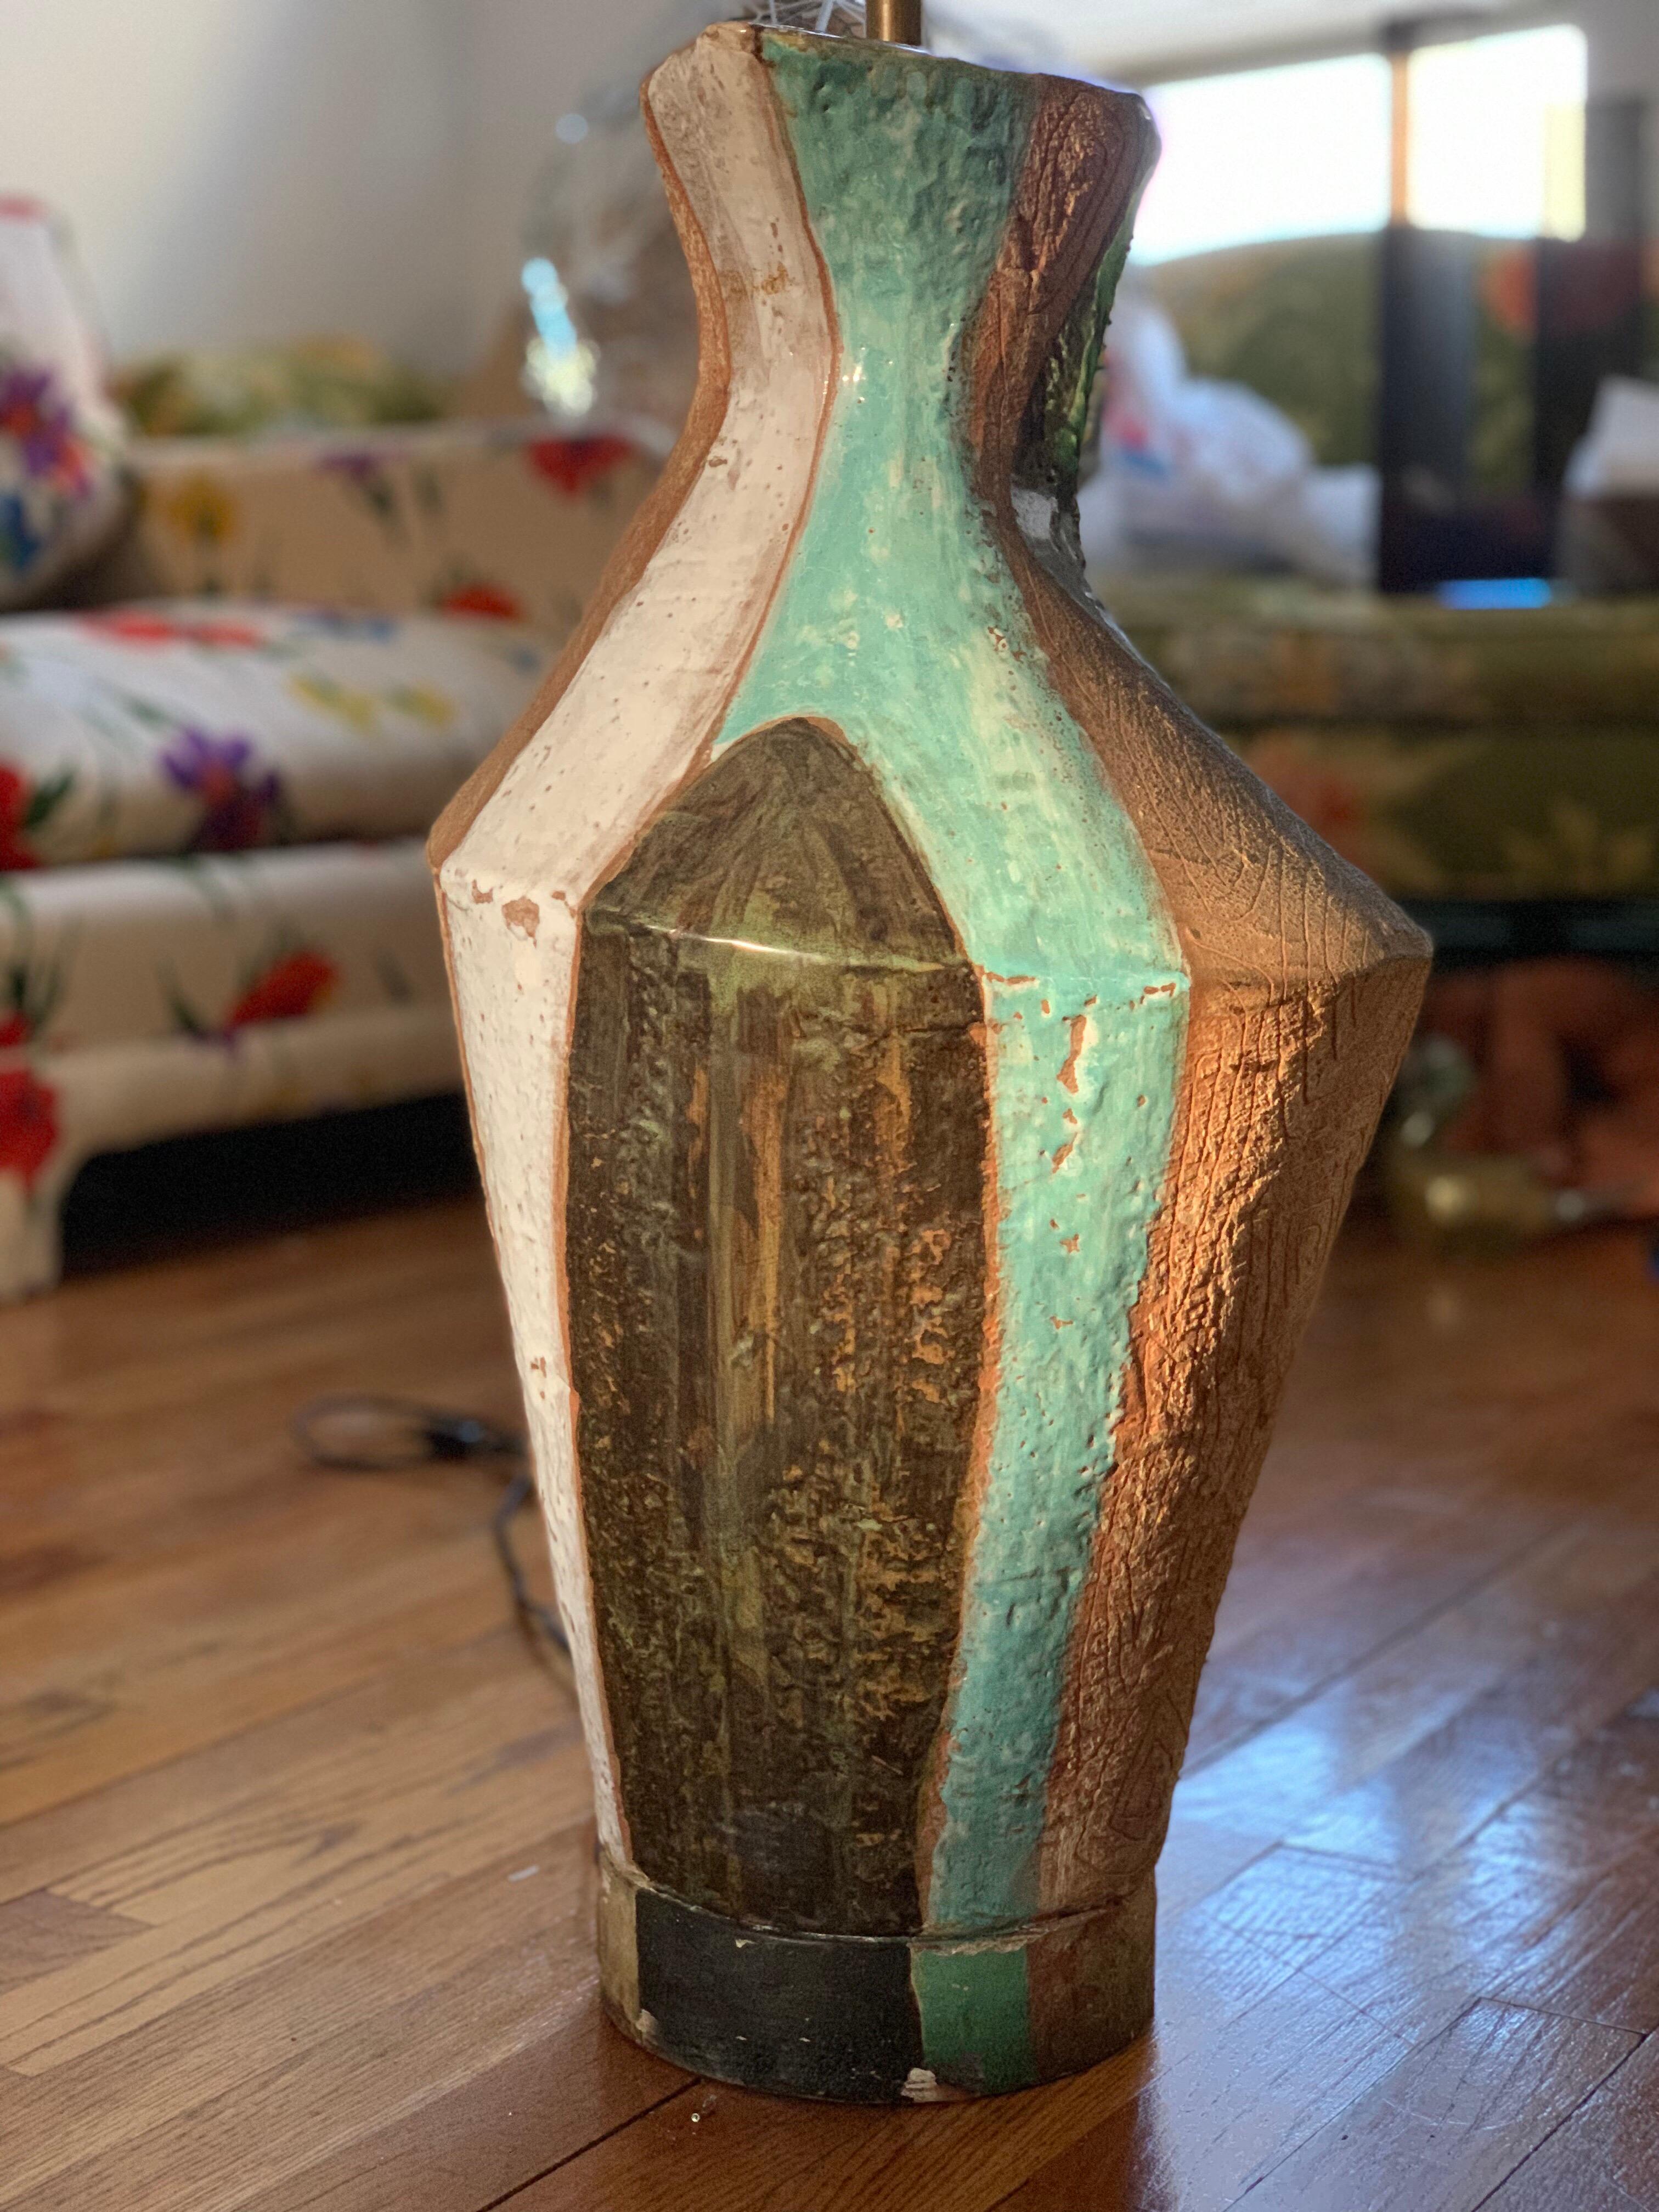 Stunning Marianna von Allesch modern ceramic table lamp with original custom shade, circa 1948. Exceptional form and color. Single owner, commissioned directly from artist for a Brooklyn estate. This lamp was designed along with another one to frame